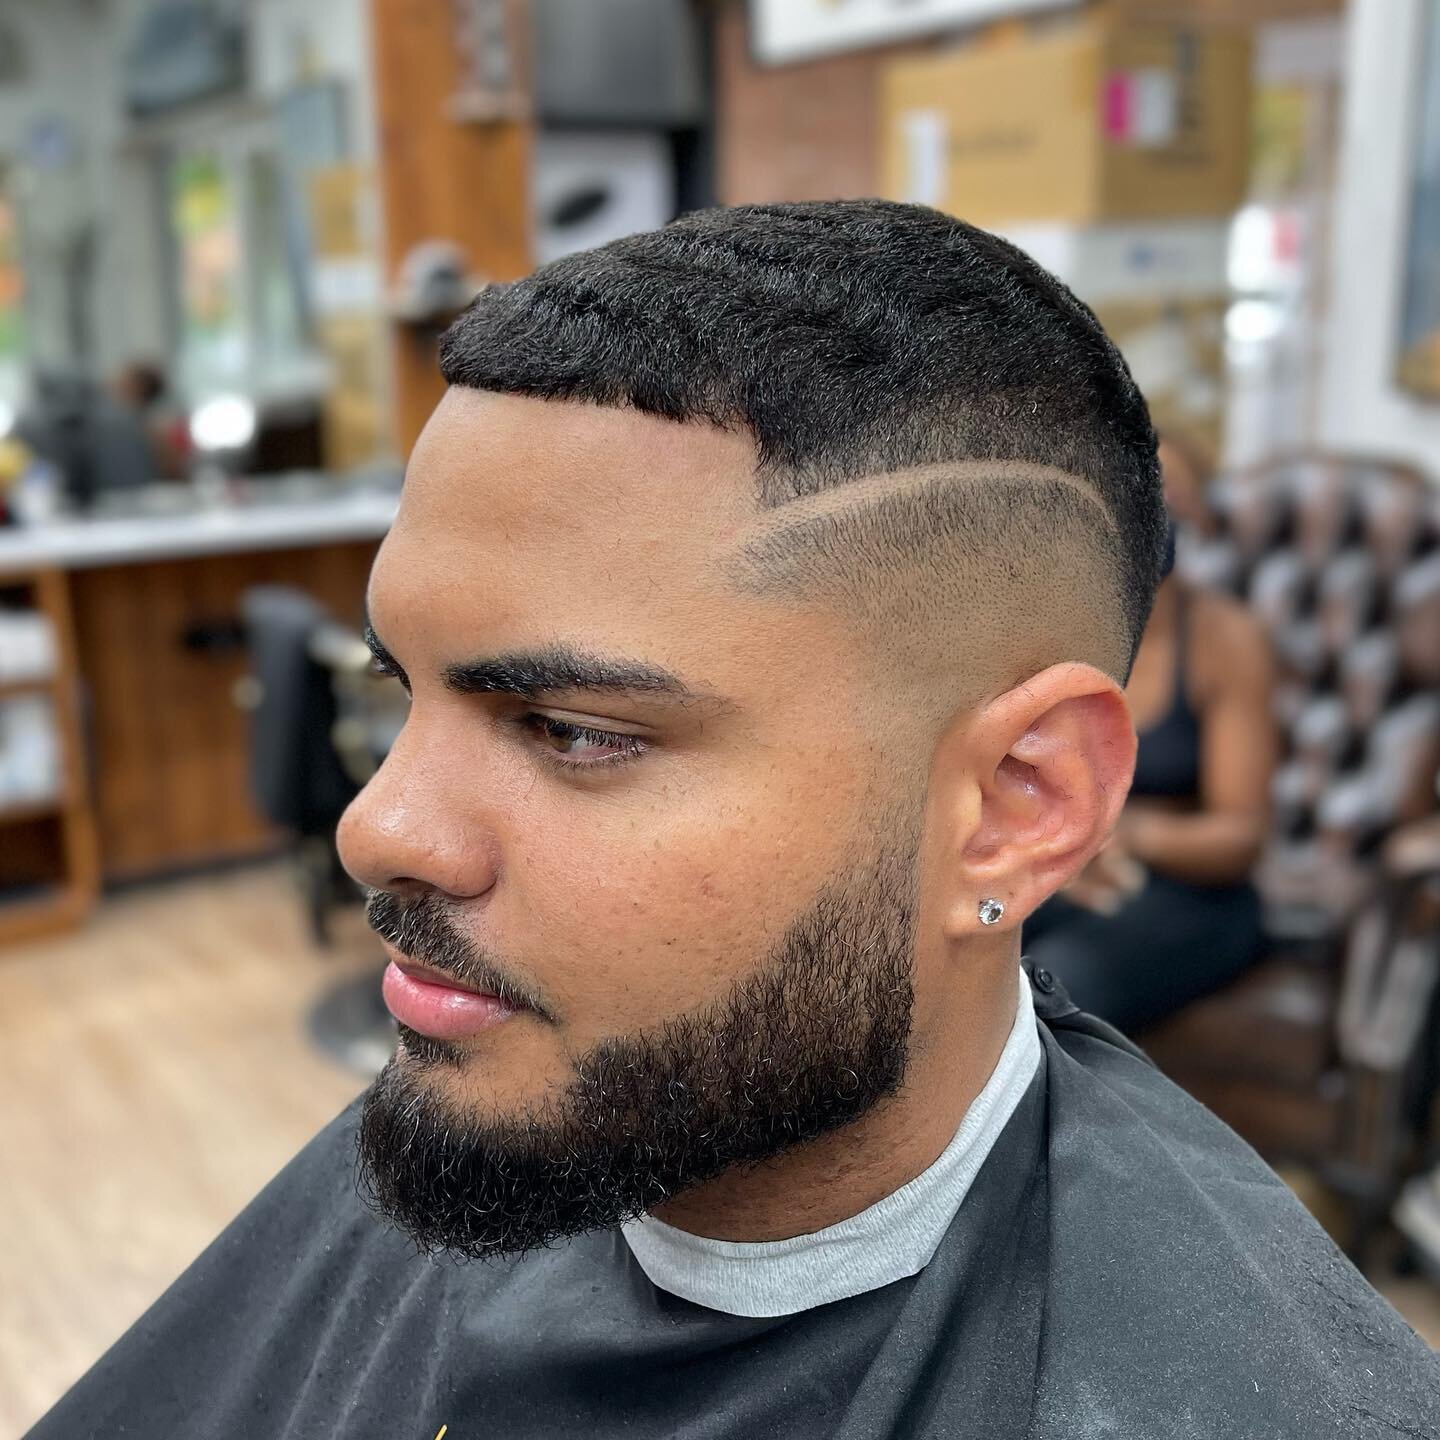 We hold ourselves to the highest of standards at Empire State - evident by this sharp cut 🔥 

If you&rsquo;re looking for a barber that&rsquo;s second to none then head to our bio to book yourself in!